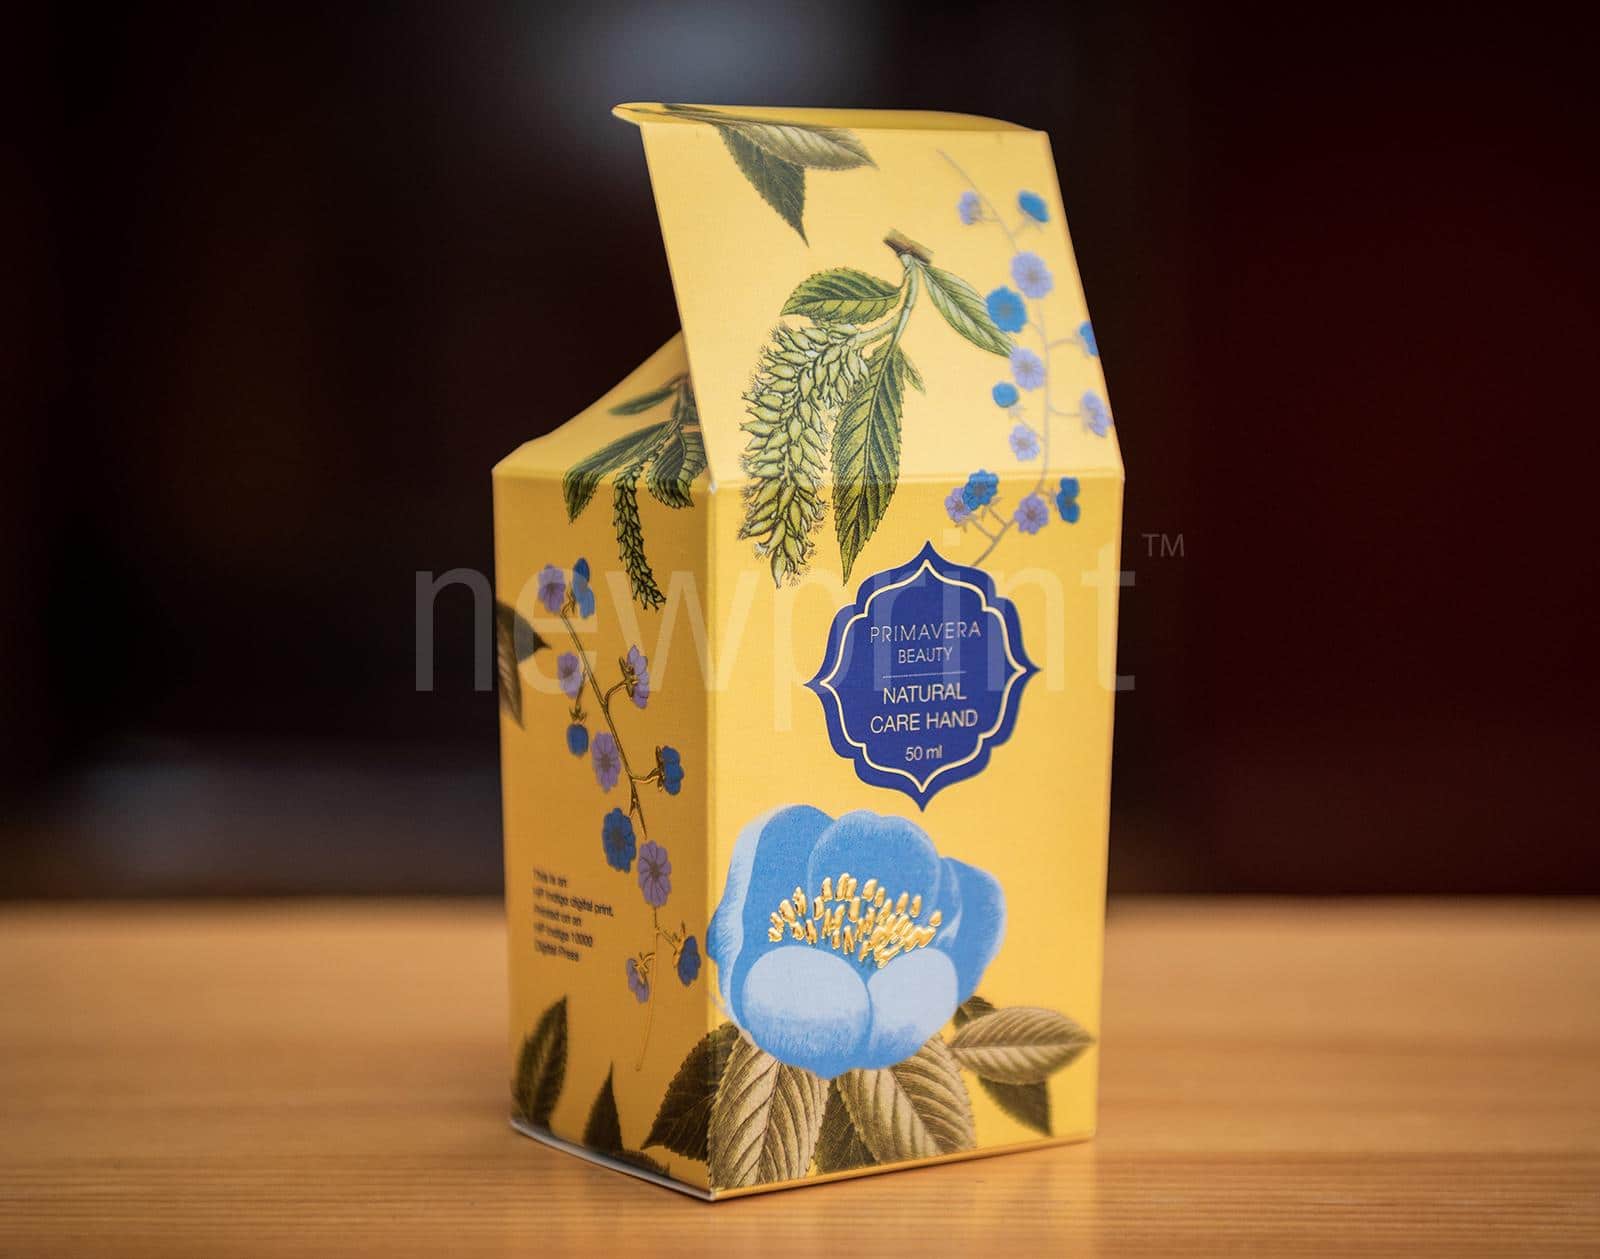 Packaging box with gold foil detail.